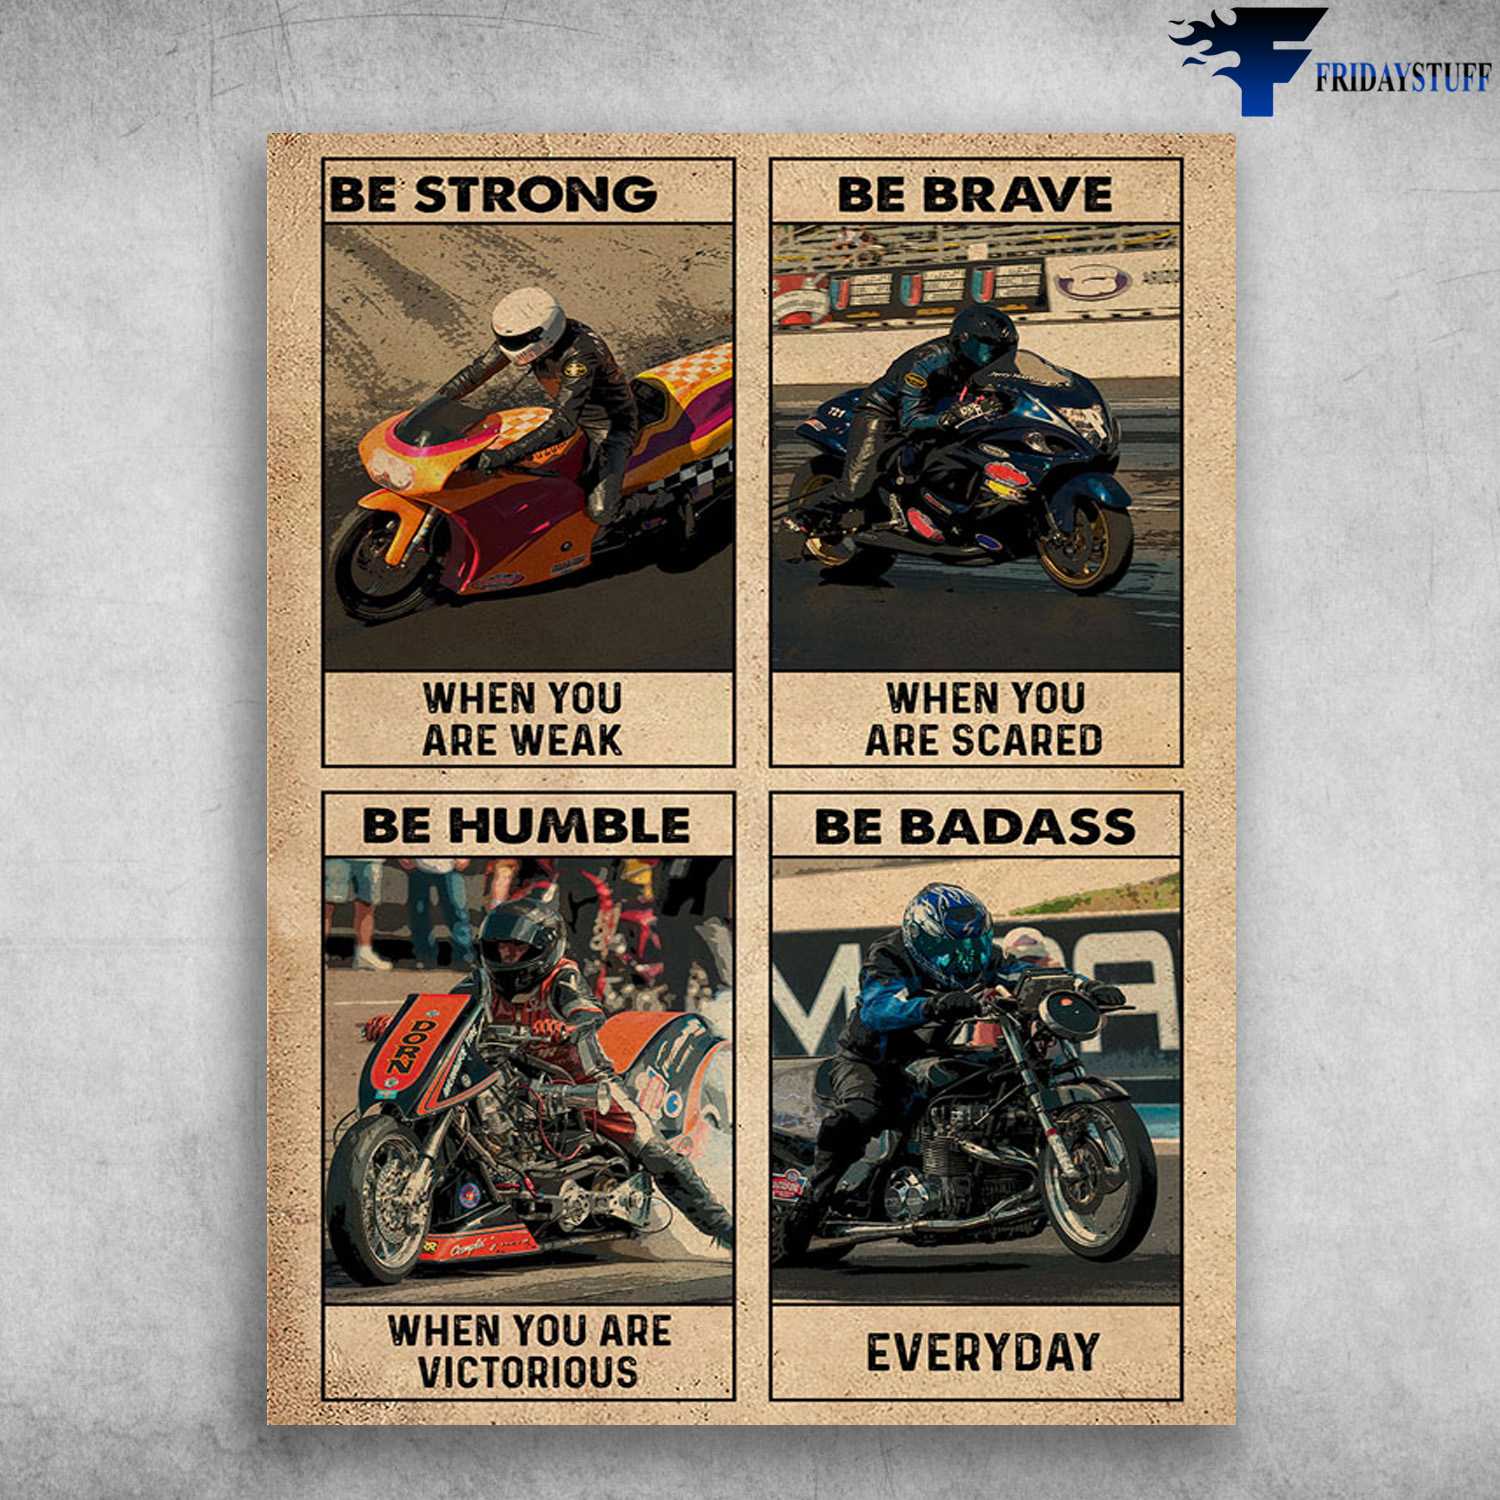 Motorcycle Poster, Biker Lover, Motobike Man - Be Strong When You Are Weak, Be Brave When You Are Scared, Be Humble When You Are Victorious, Be Badass Everyday